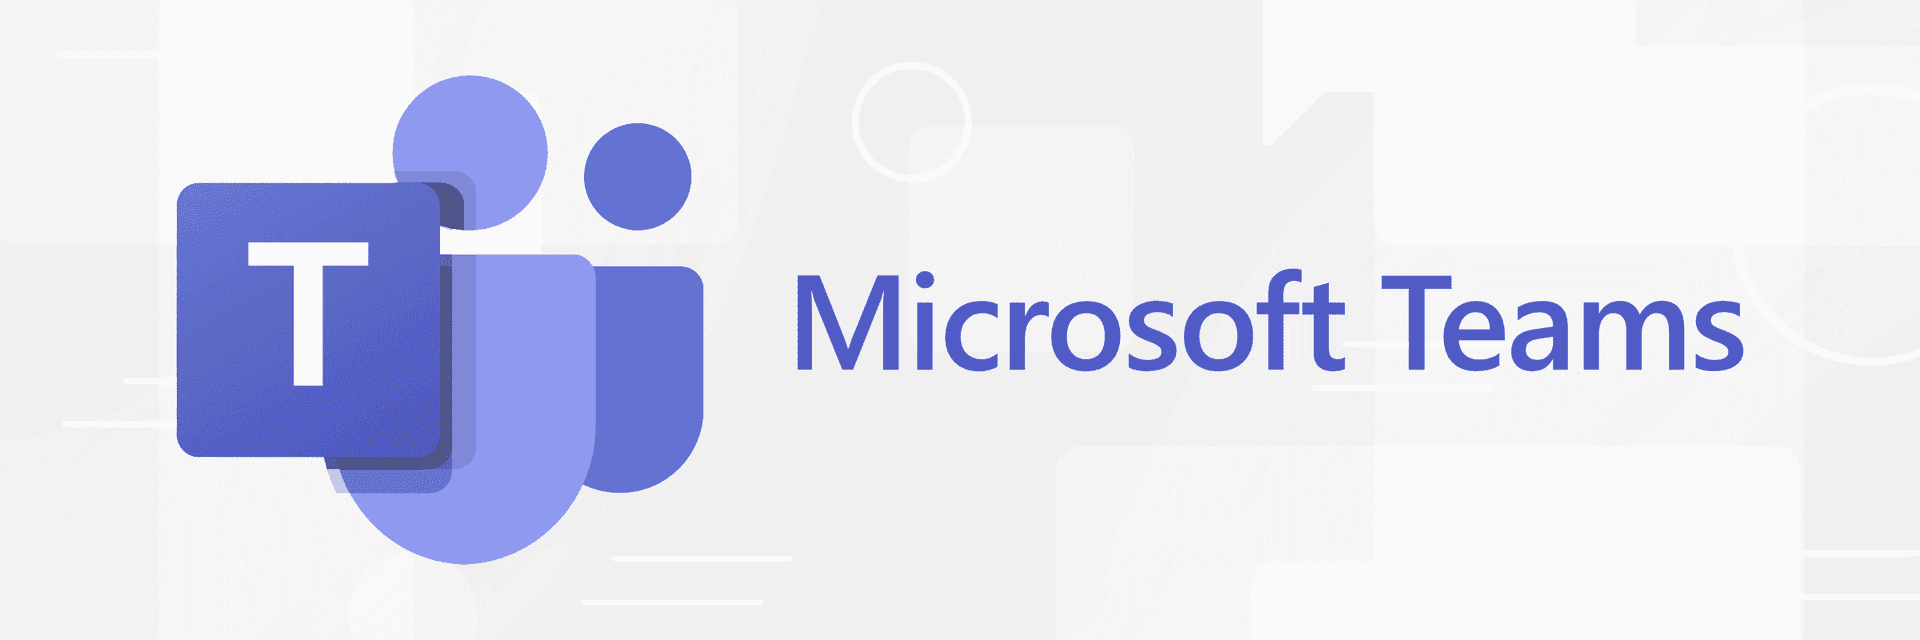 Introducing: Integration with Microsoft Teams